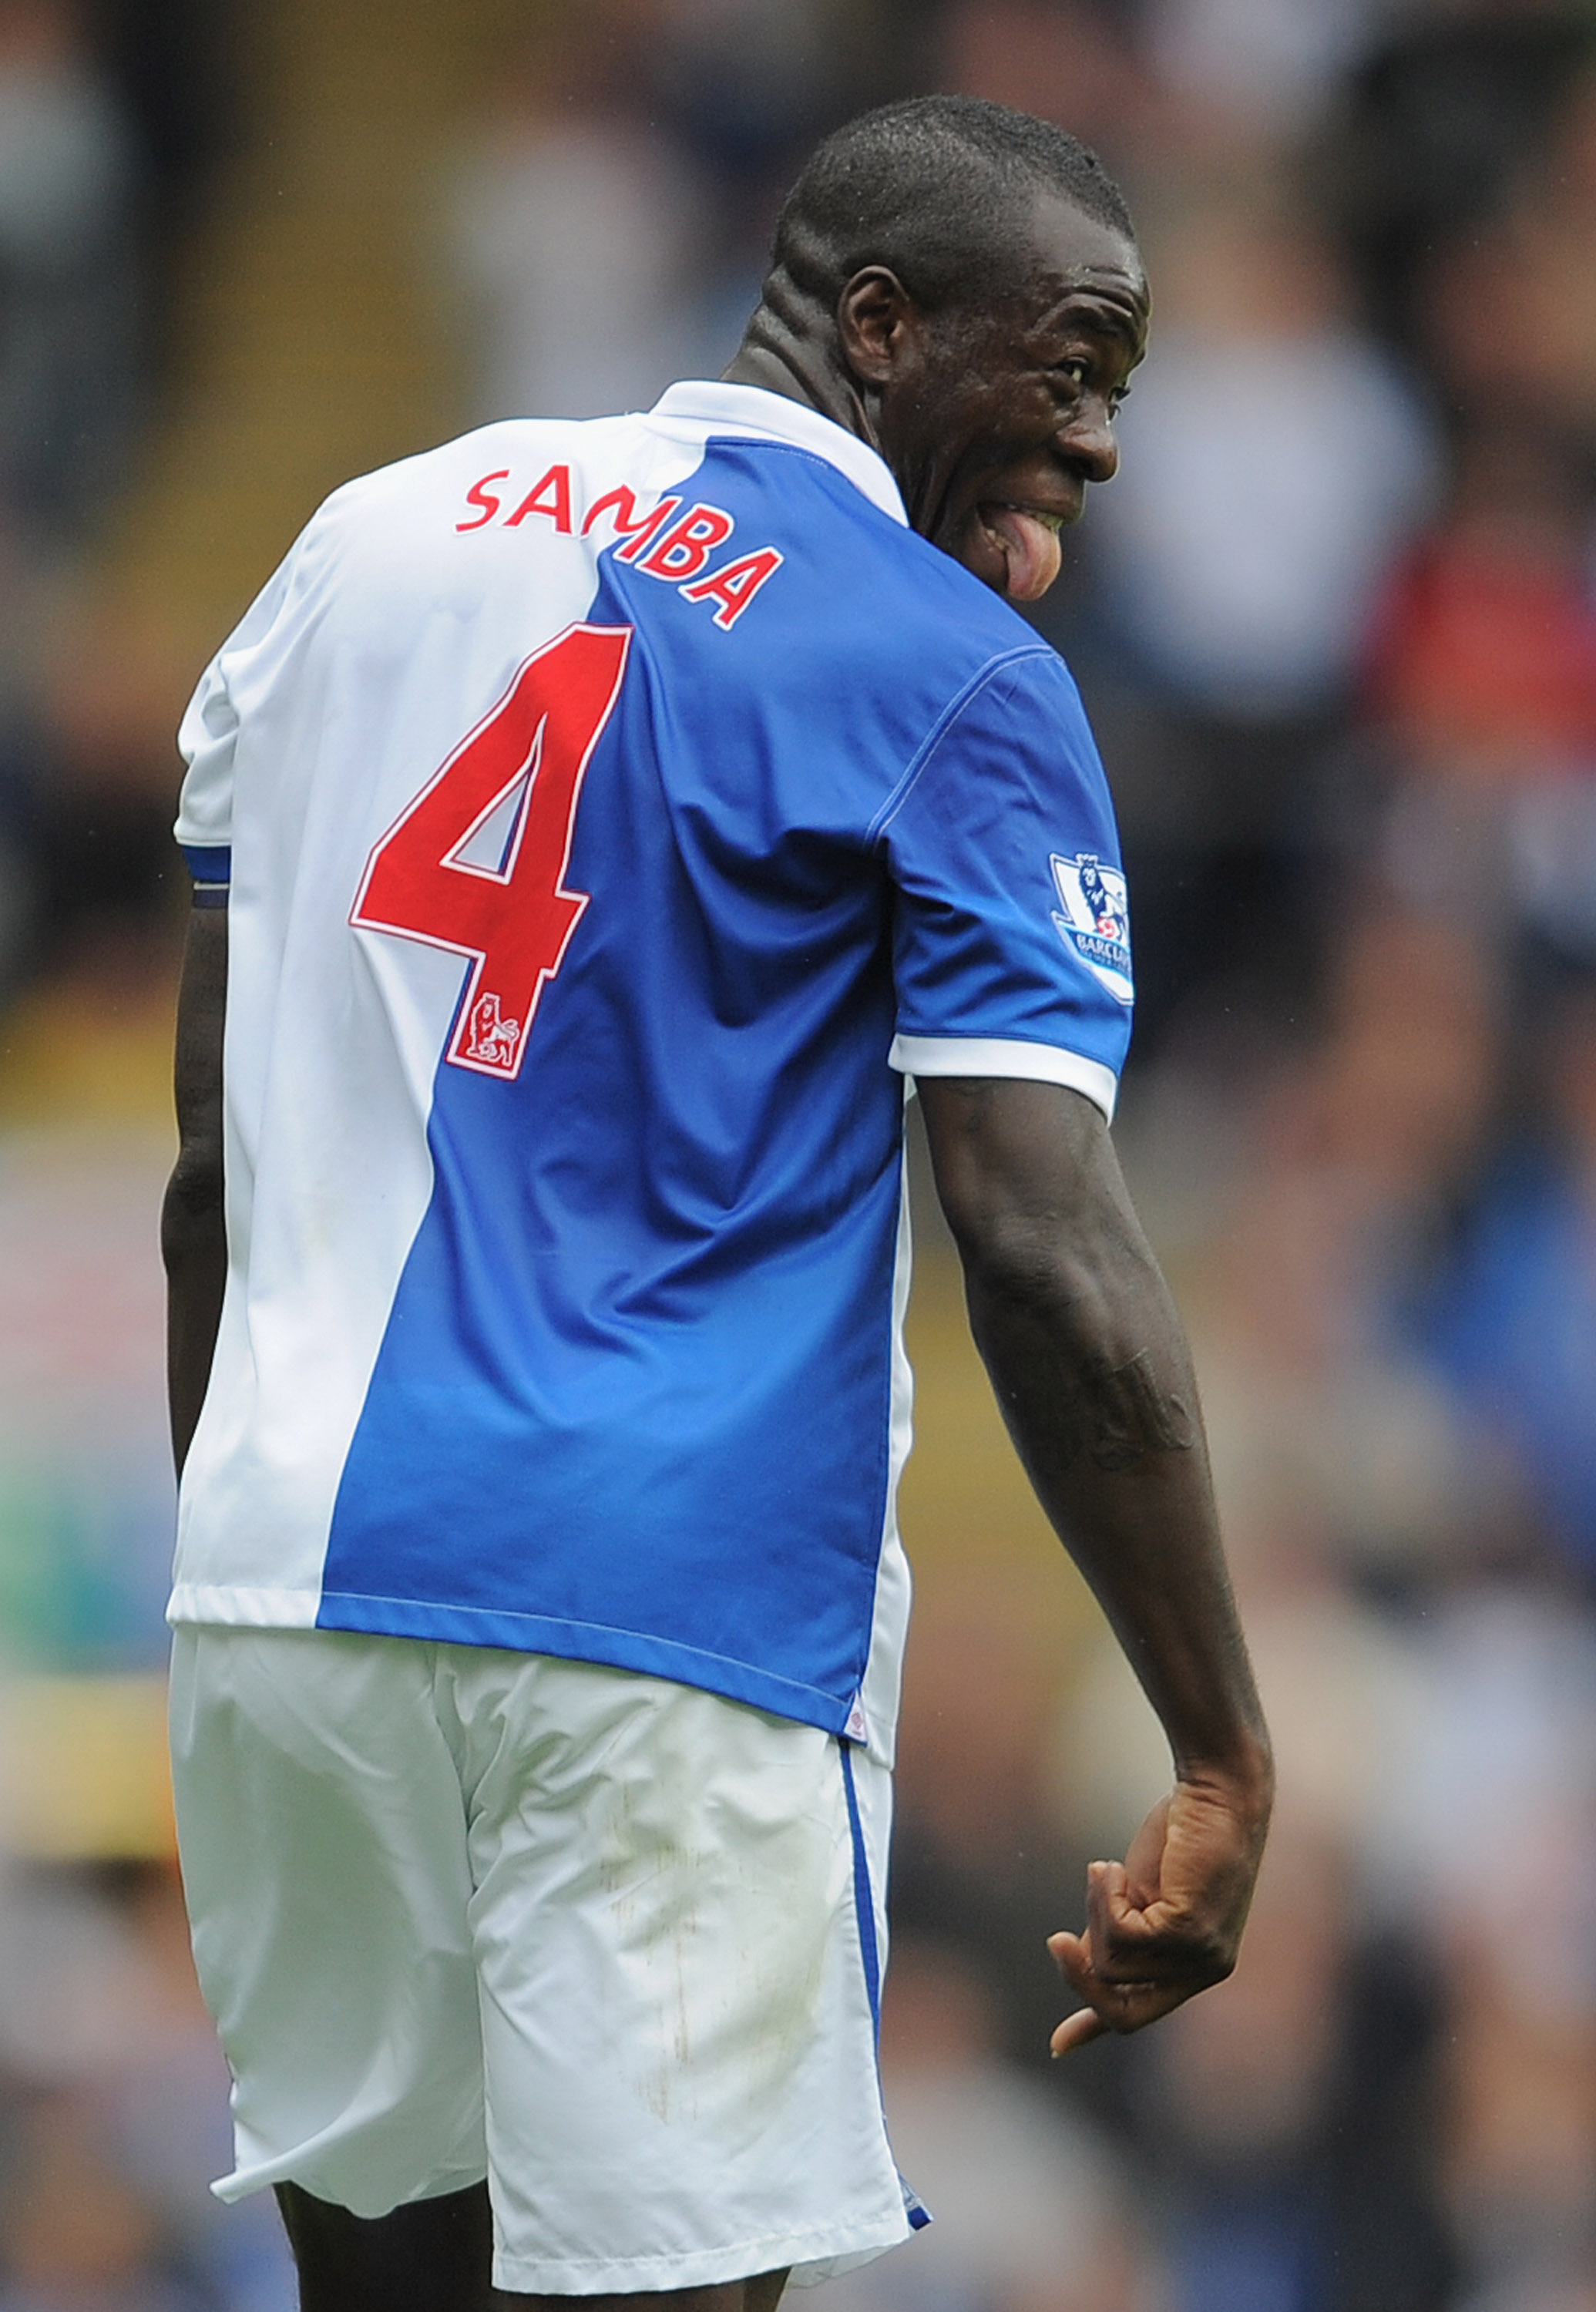 BLACKBURN, ENGLAND - SEPTEMBER 18:  Chris Samba of Blackburn celebrates scoring with a header to make it 1-0 during the Barclays Premier League match between Blackburn Rovers and Fulham at Ewood park on September 18, 2010 in Blackburn, England.  (Photo by